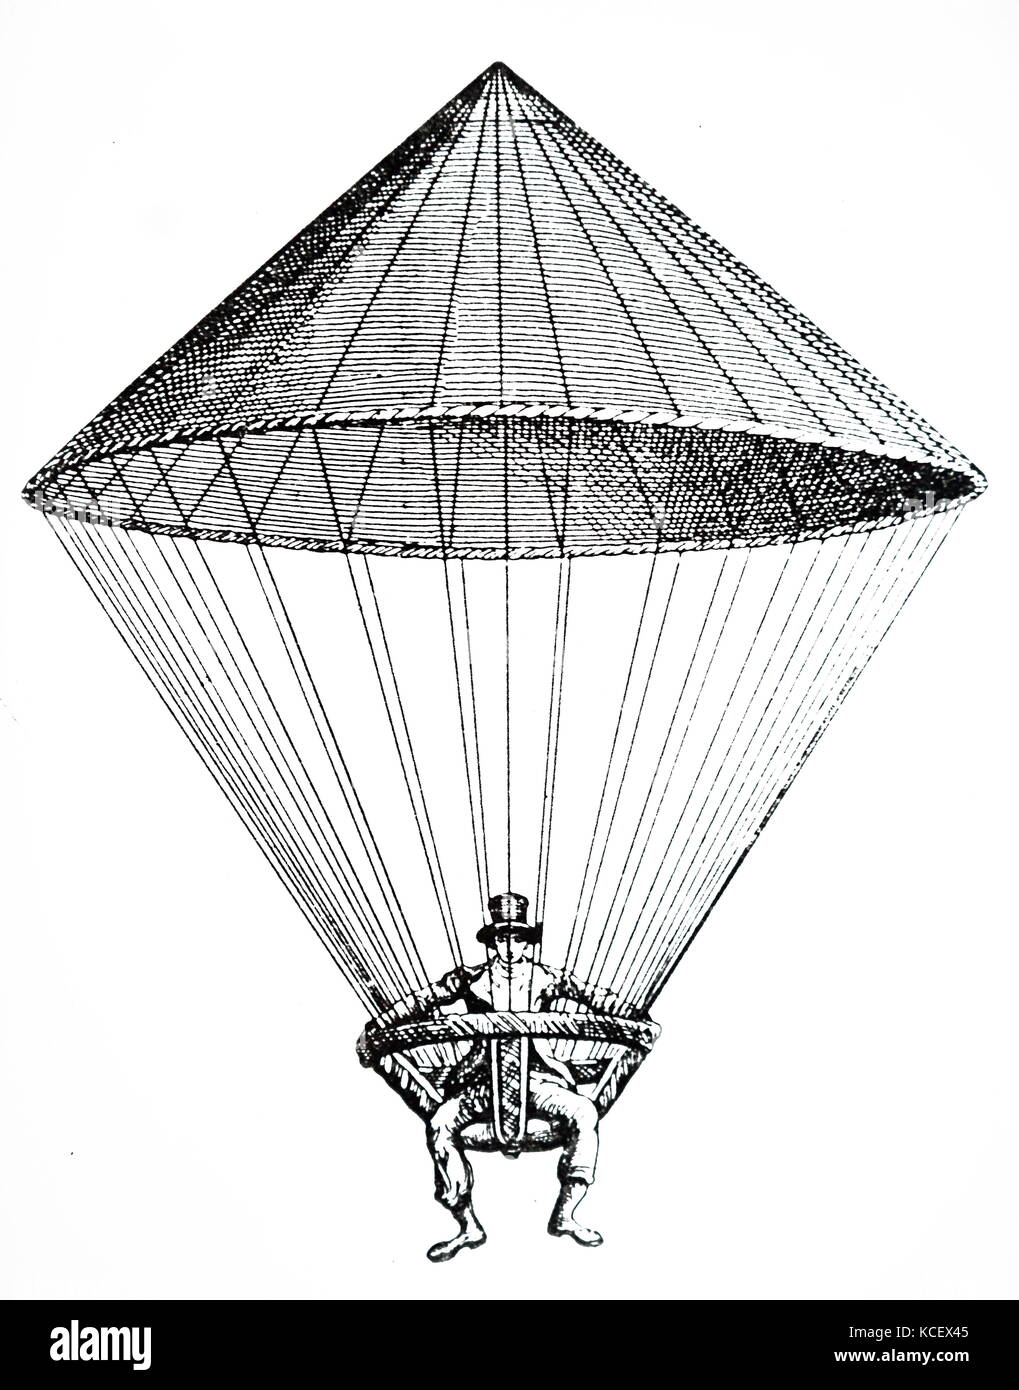 The Parachute Was Actually Invented in the Late 18th Century by a Frenchman Louis-Sébastien Lenormand